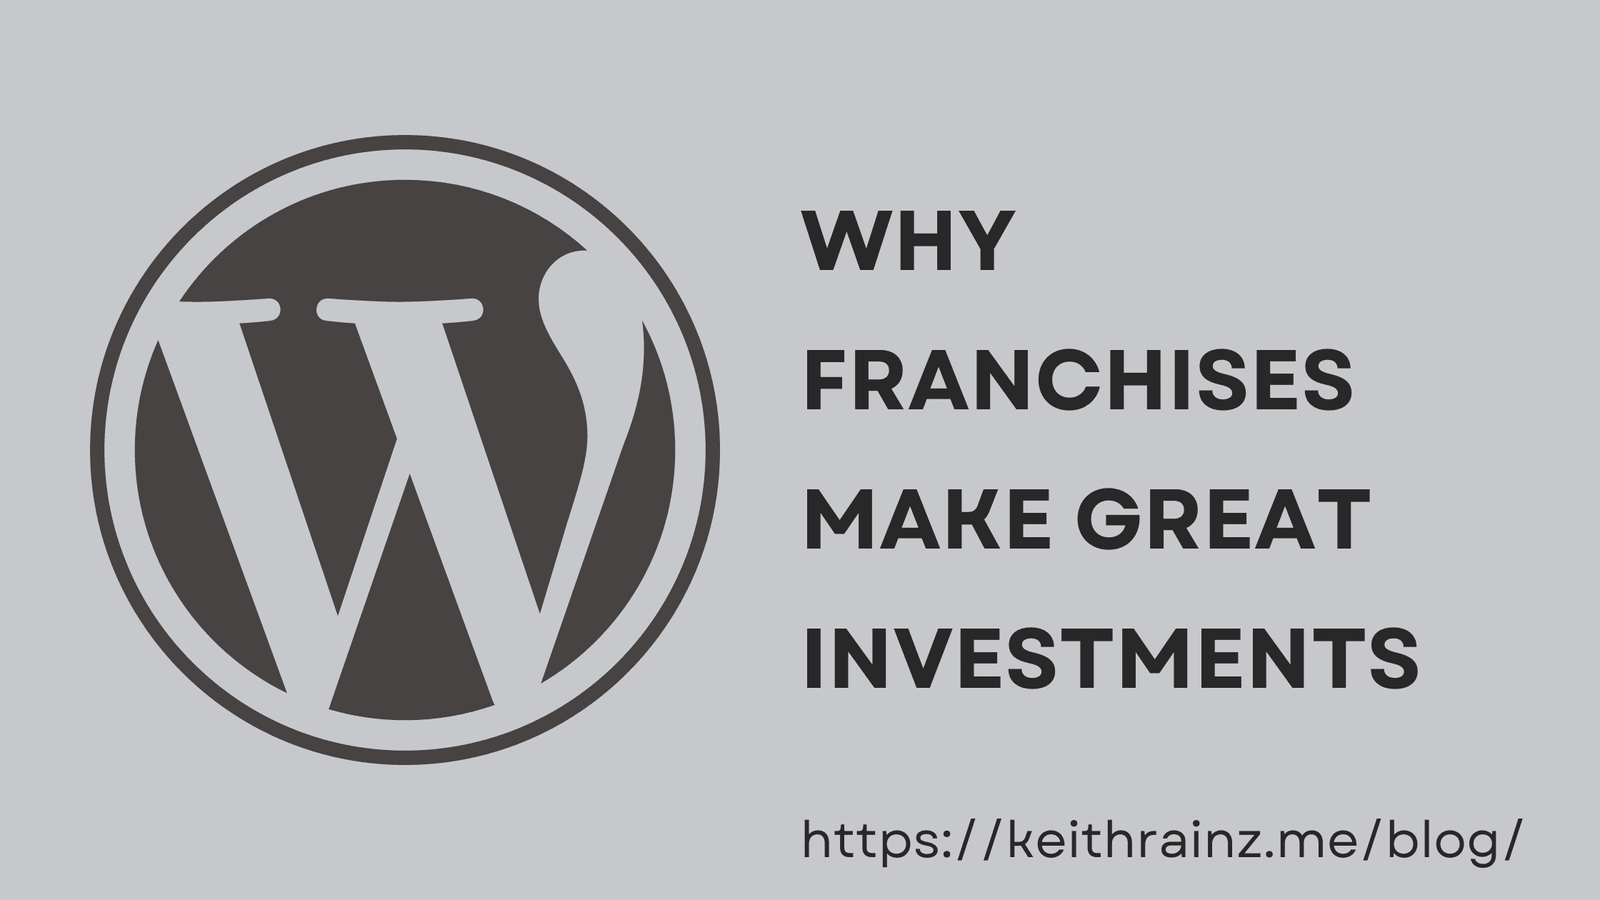 Why Franchises Make Great Investments